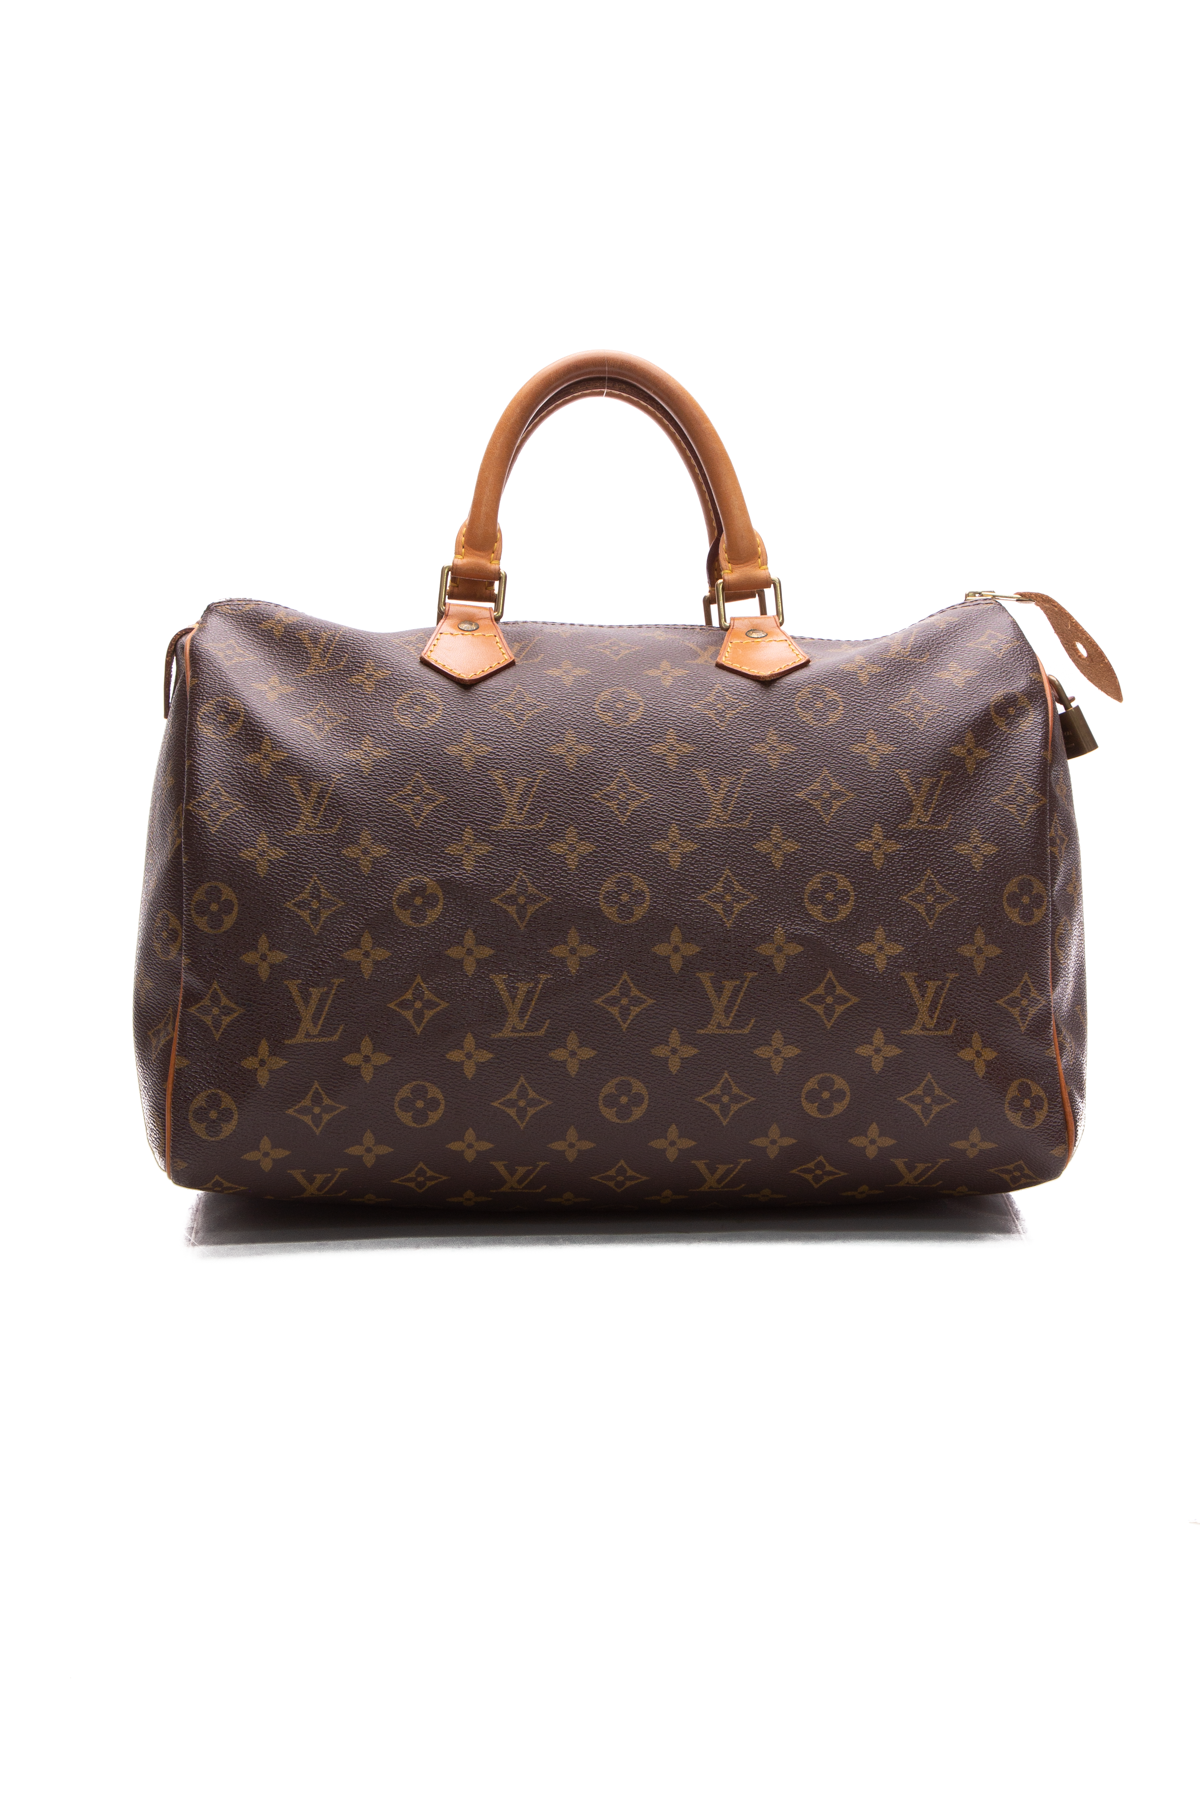 All About Louis Vuitton's Vachetta Leather - Couture USA